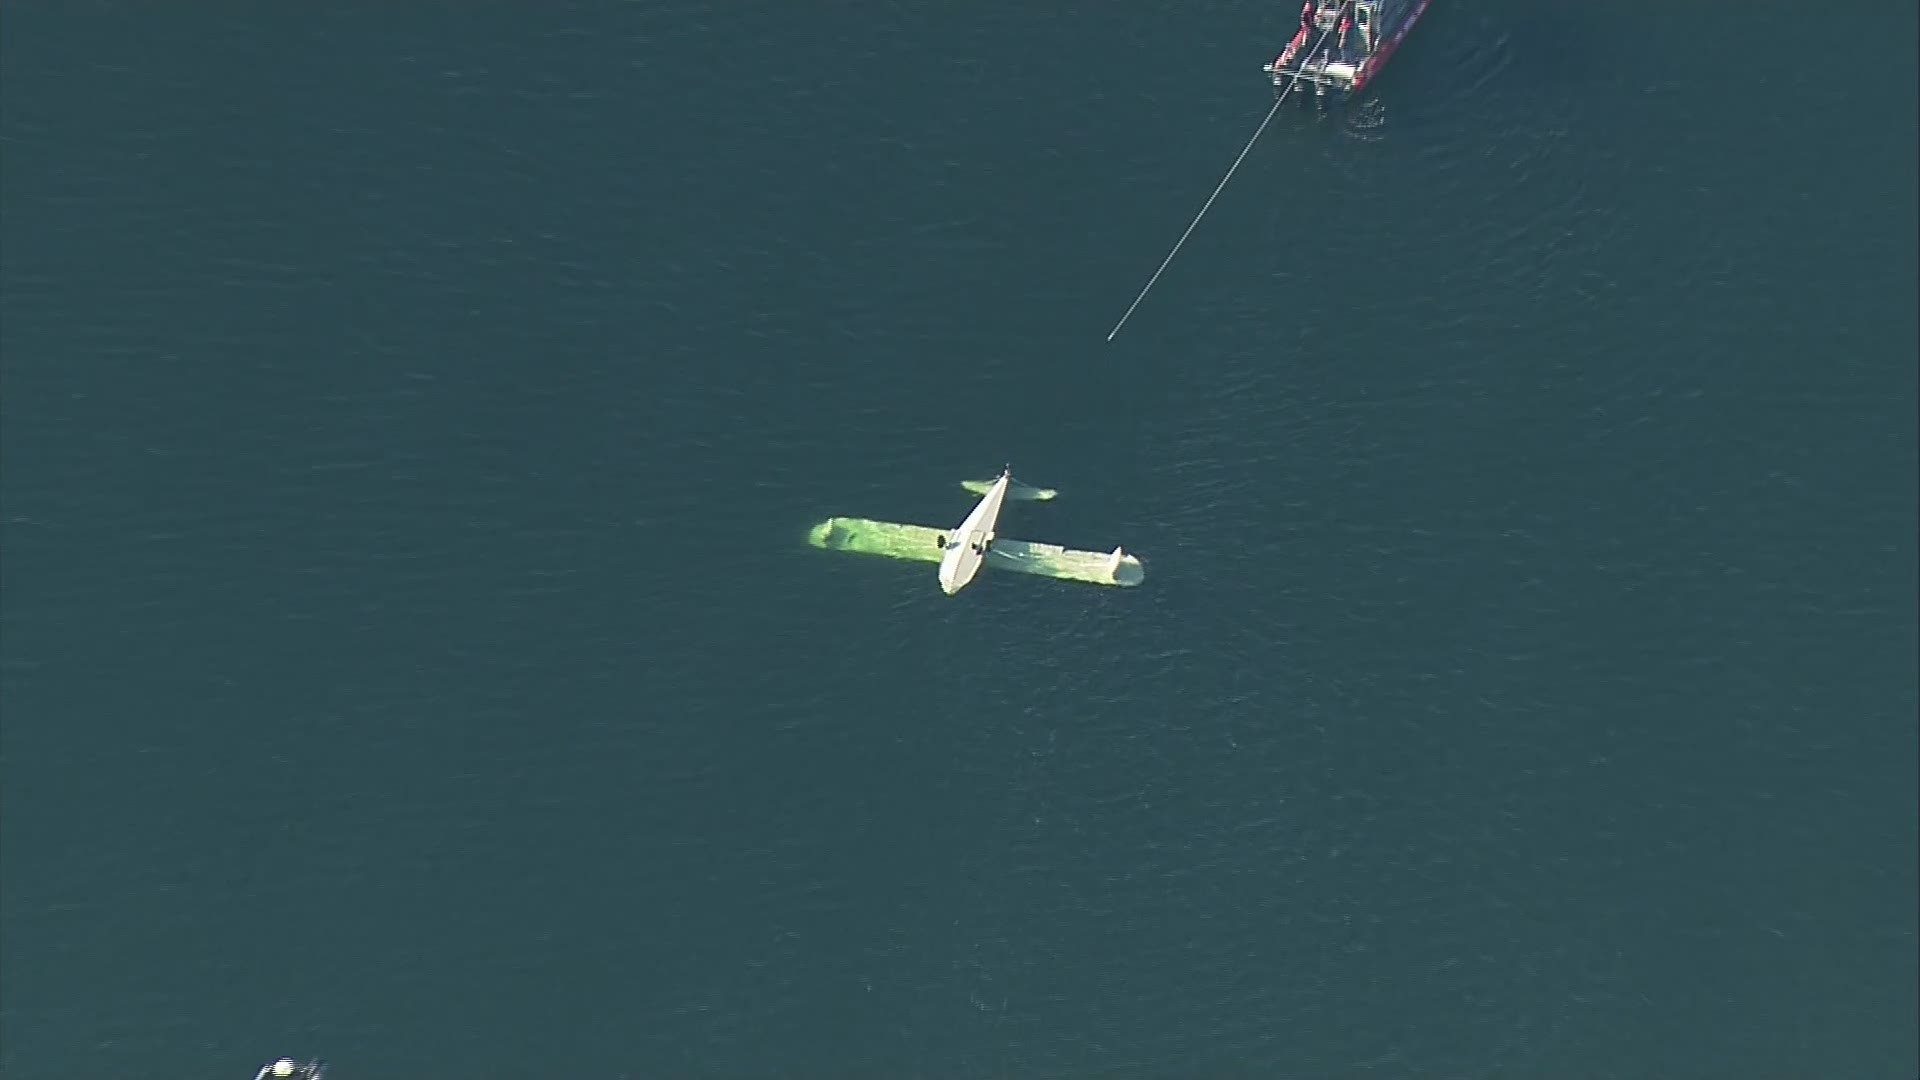 A small plane crashed into Dyes Inlet near Silverdale on Tuesday afternoon. The pilot was the only person on board and survived with a minor facial injury.